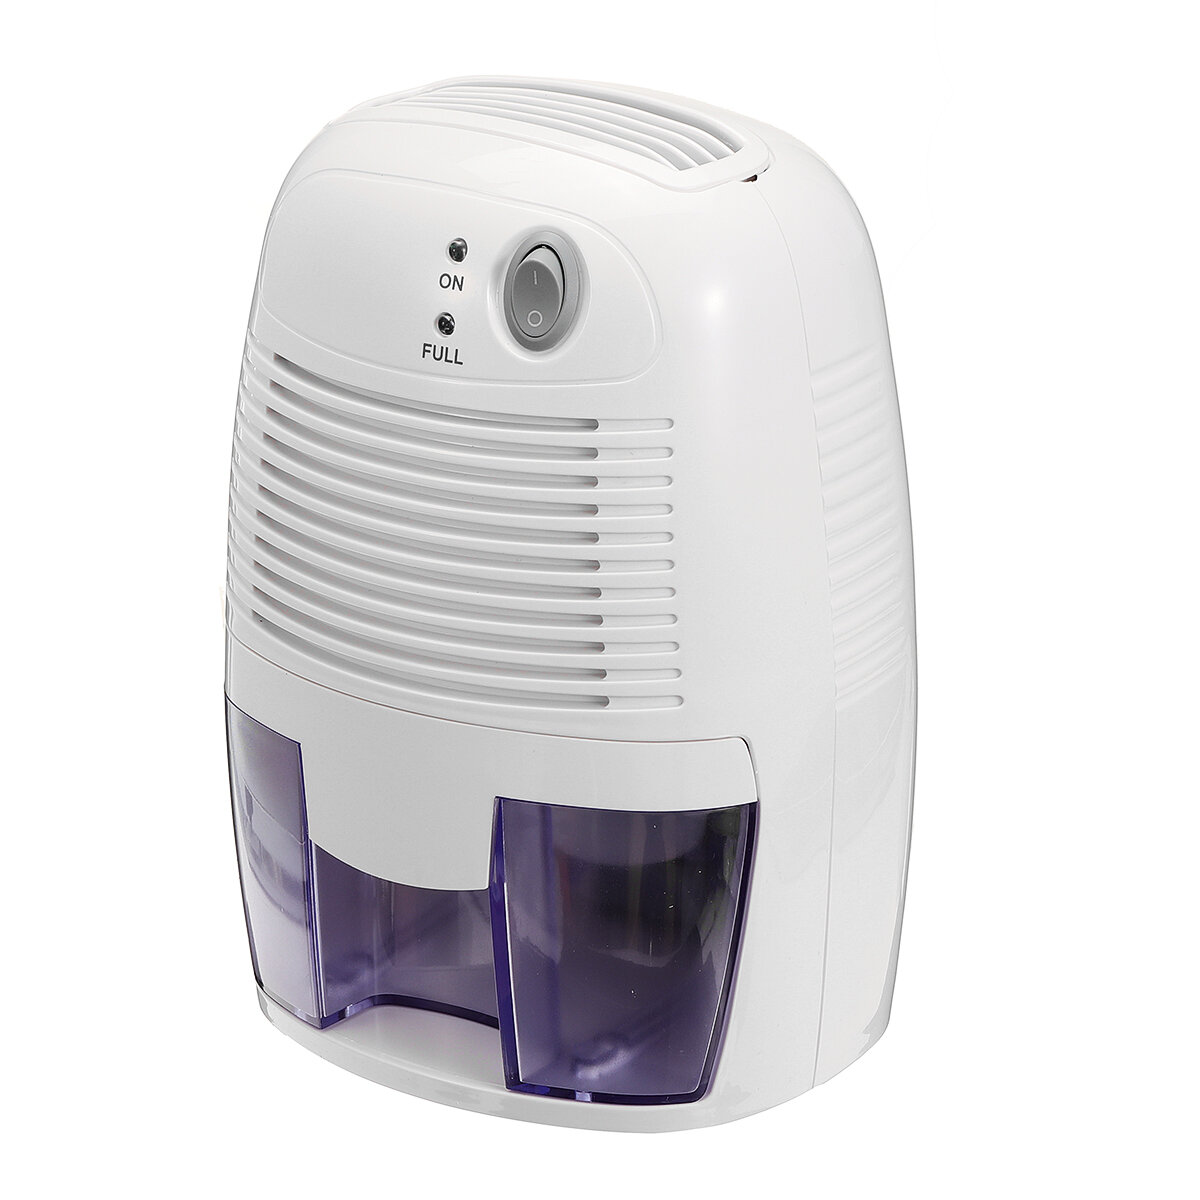 

9V Portable Dehumidifier Air Dryer Moisture Absorber Cool Dryer Low Noise for Home Bedroom Use